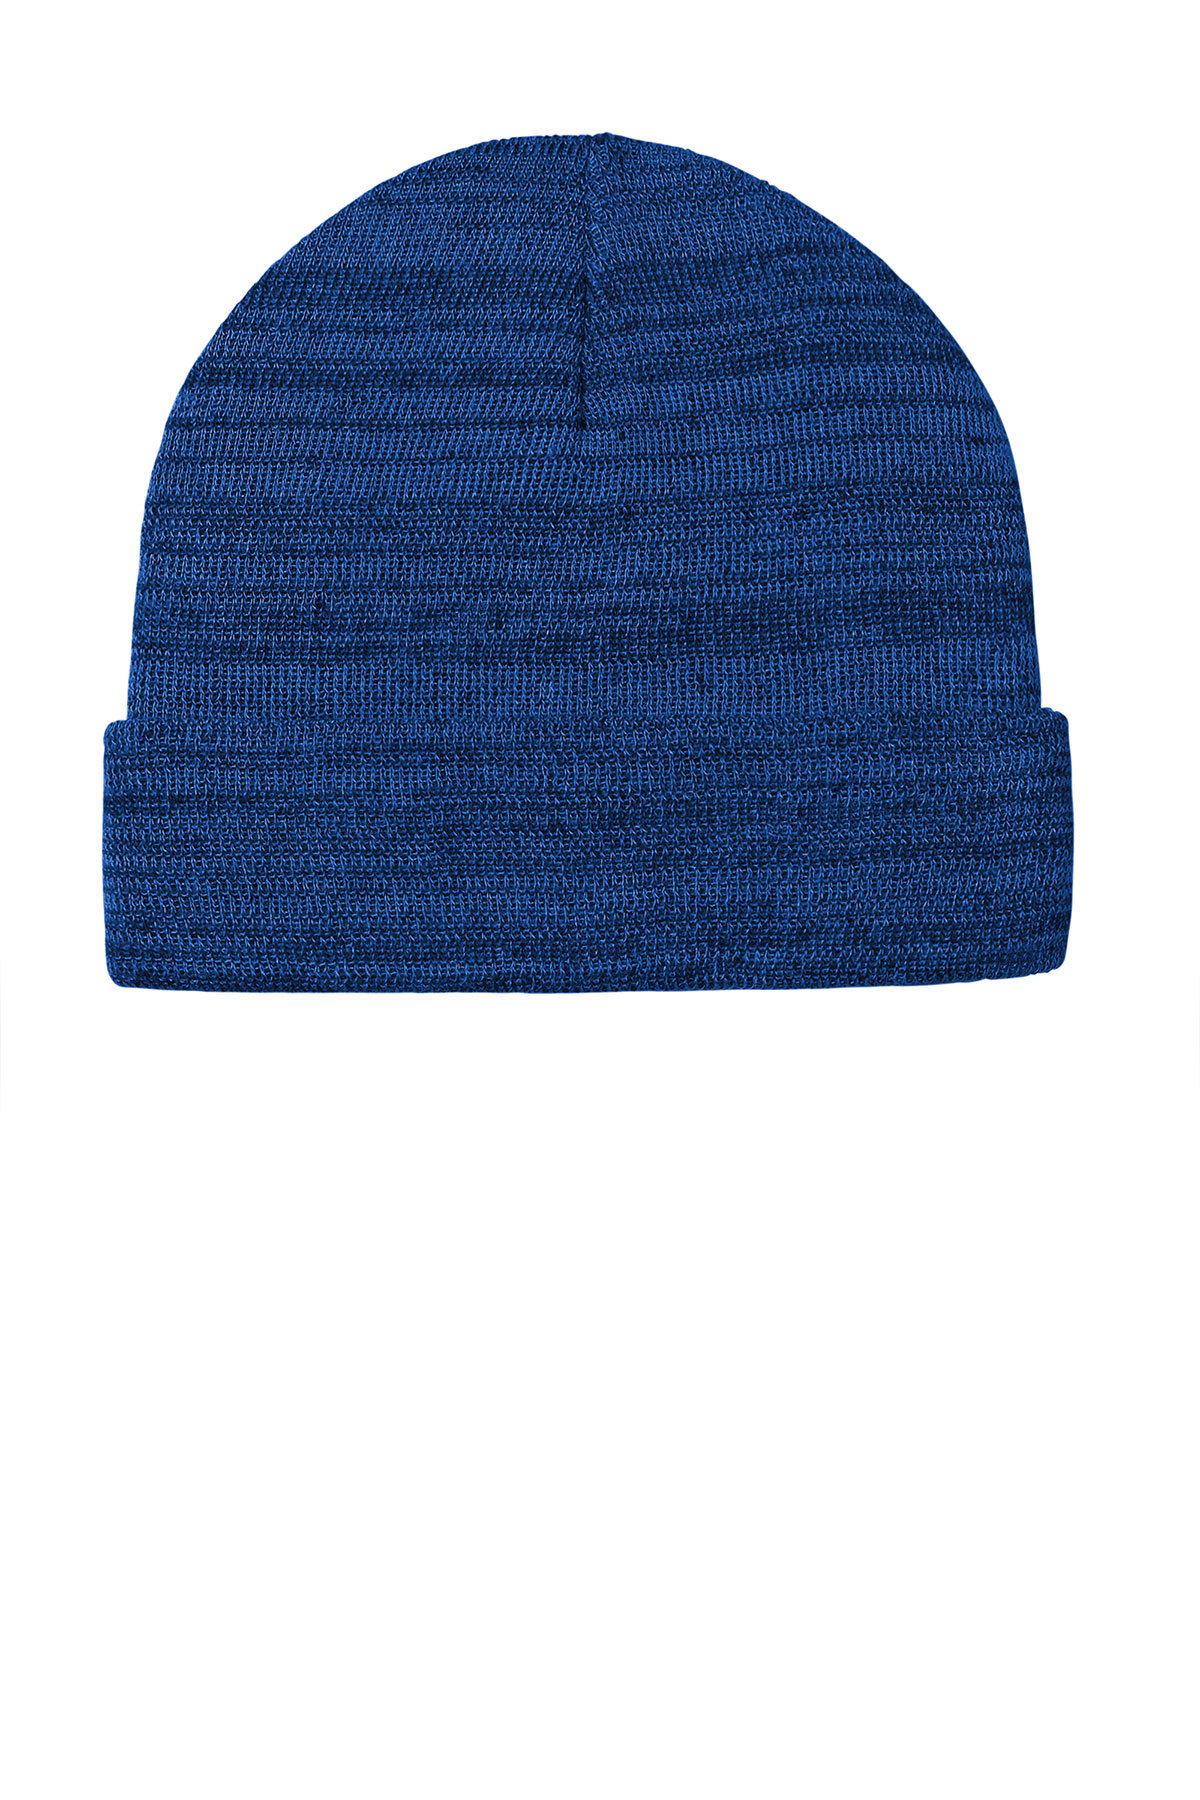 Port Authority Knit Cuff Beanie | Product | SanMar